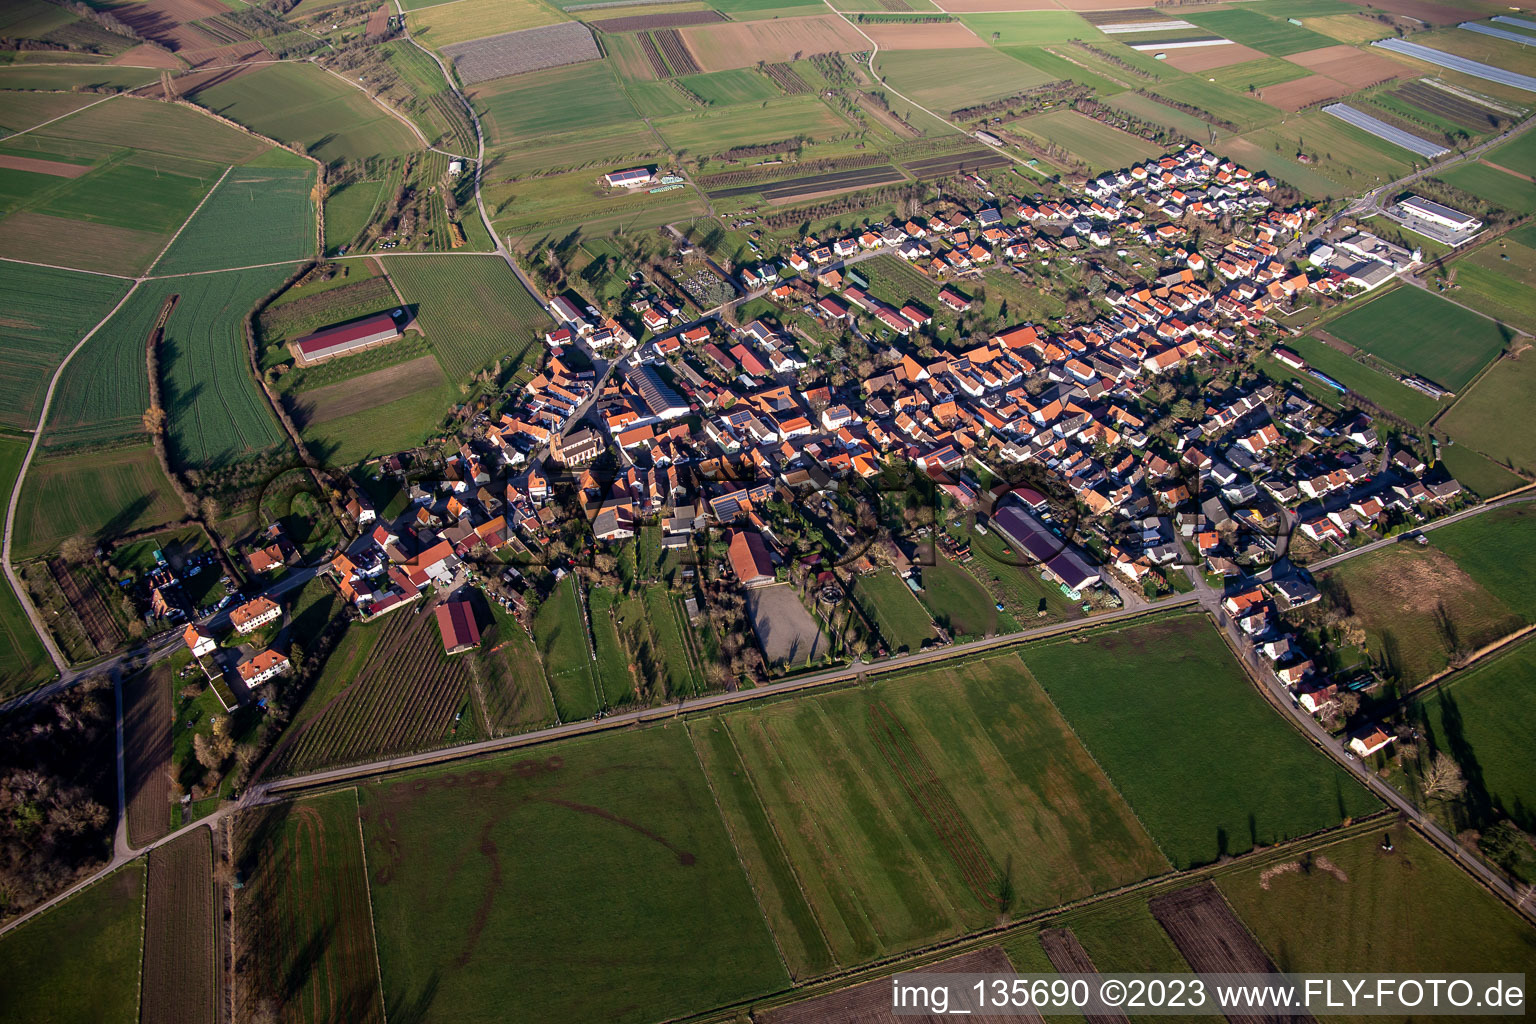 Aerial view of Schweighofen in the state Rhineland-Palatinate, Germany